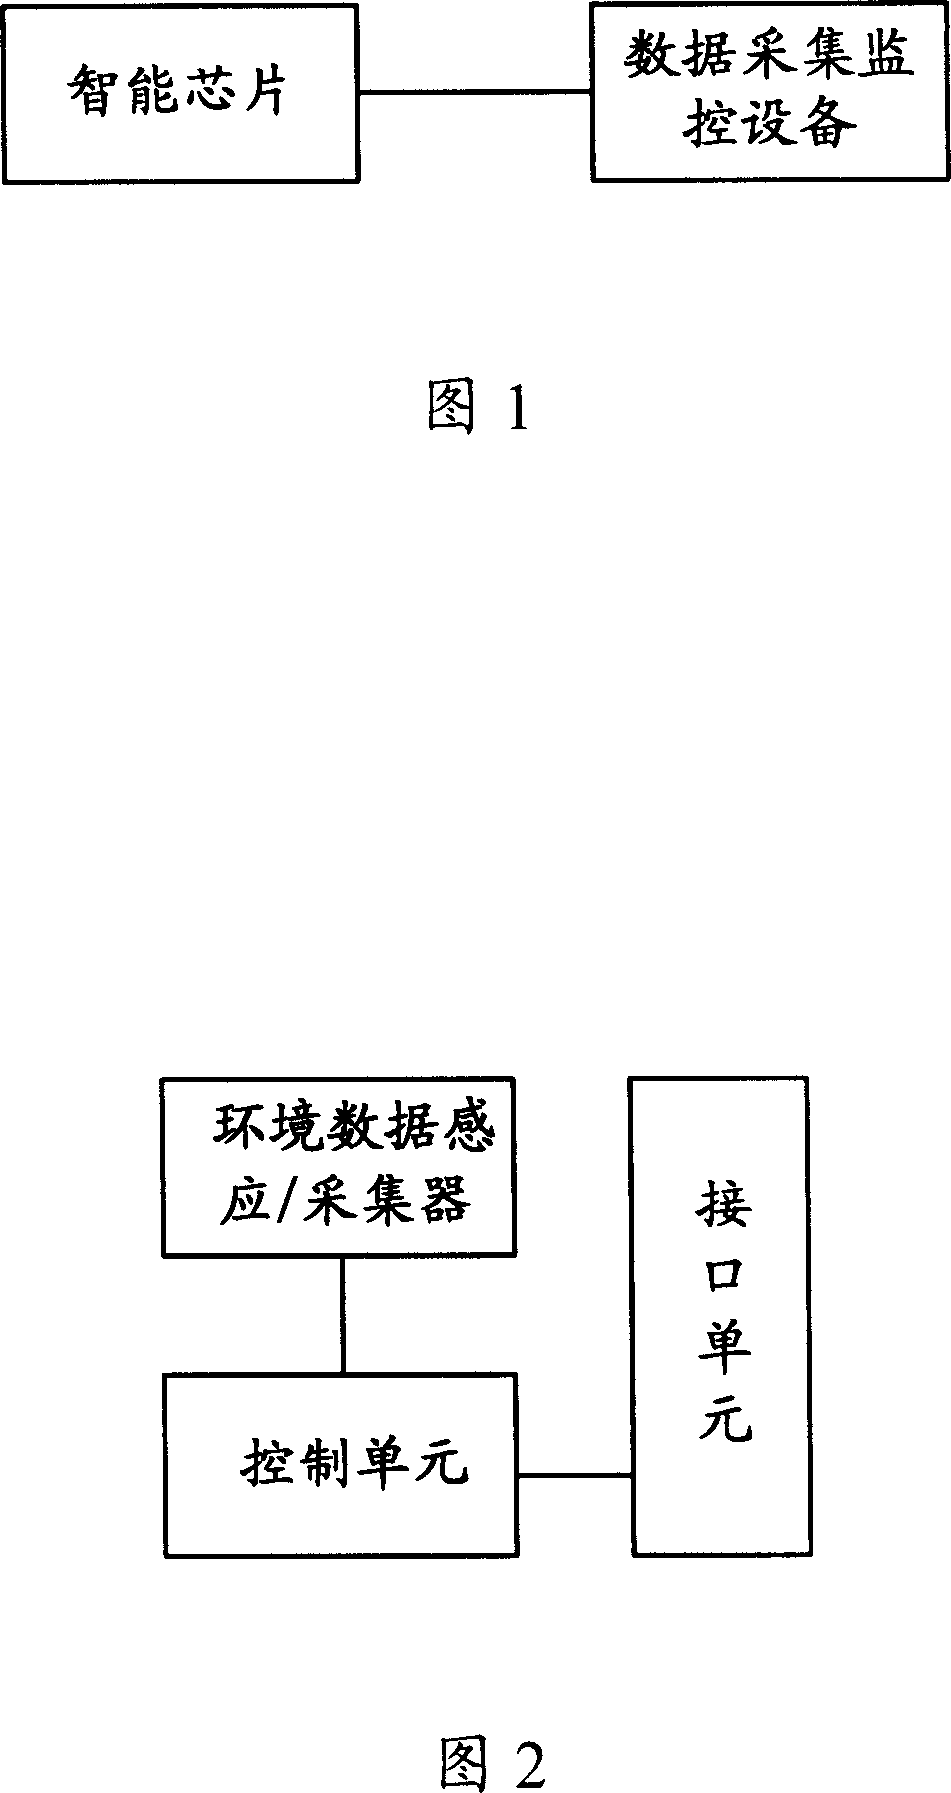 Method and system for remote control for data collection and monitoring apparatus